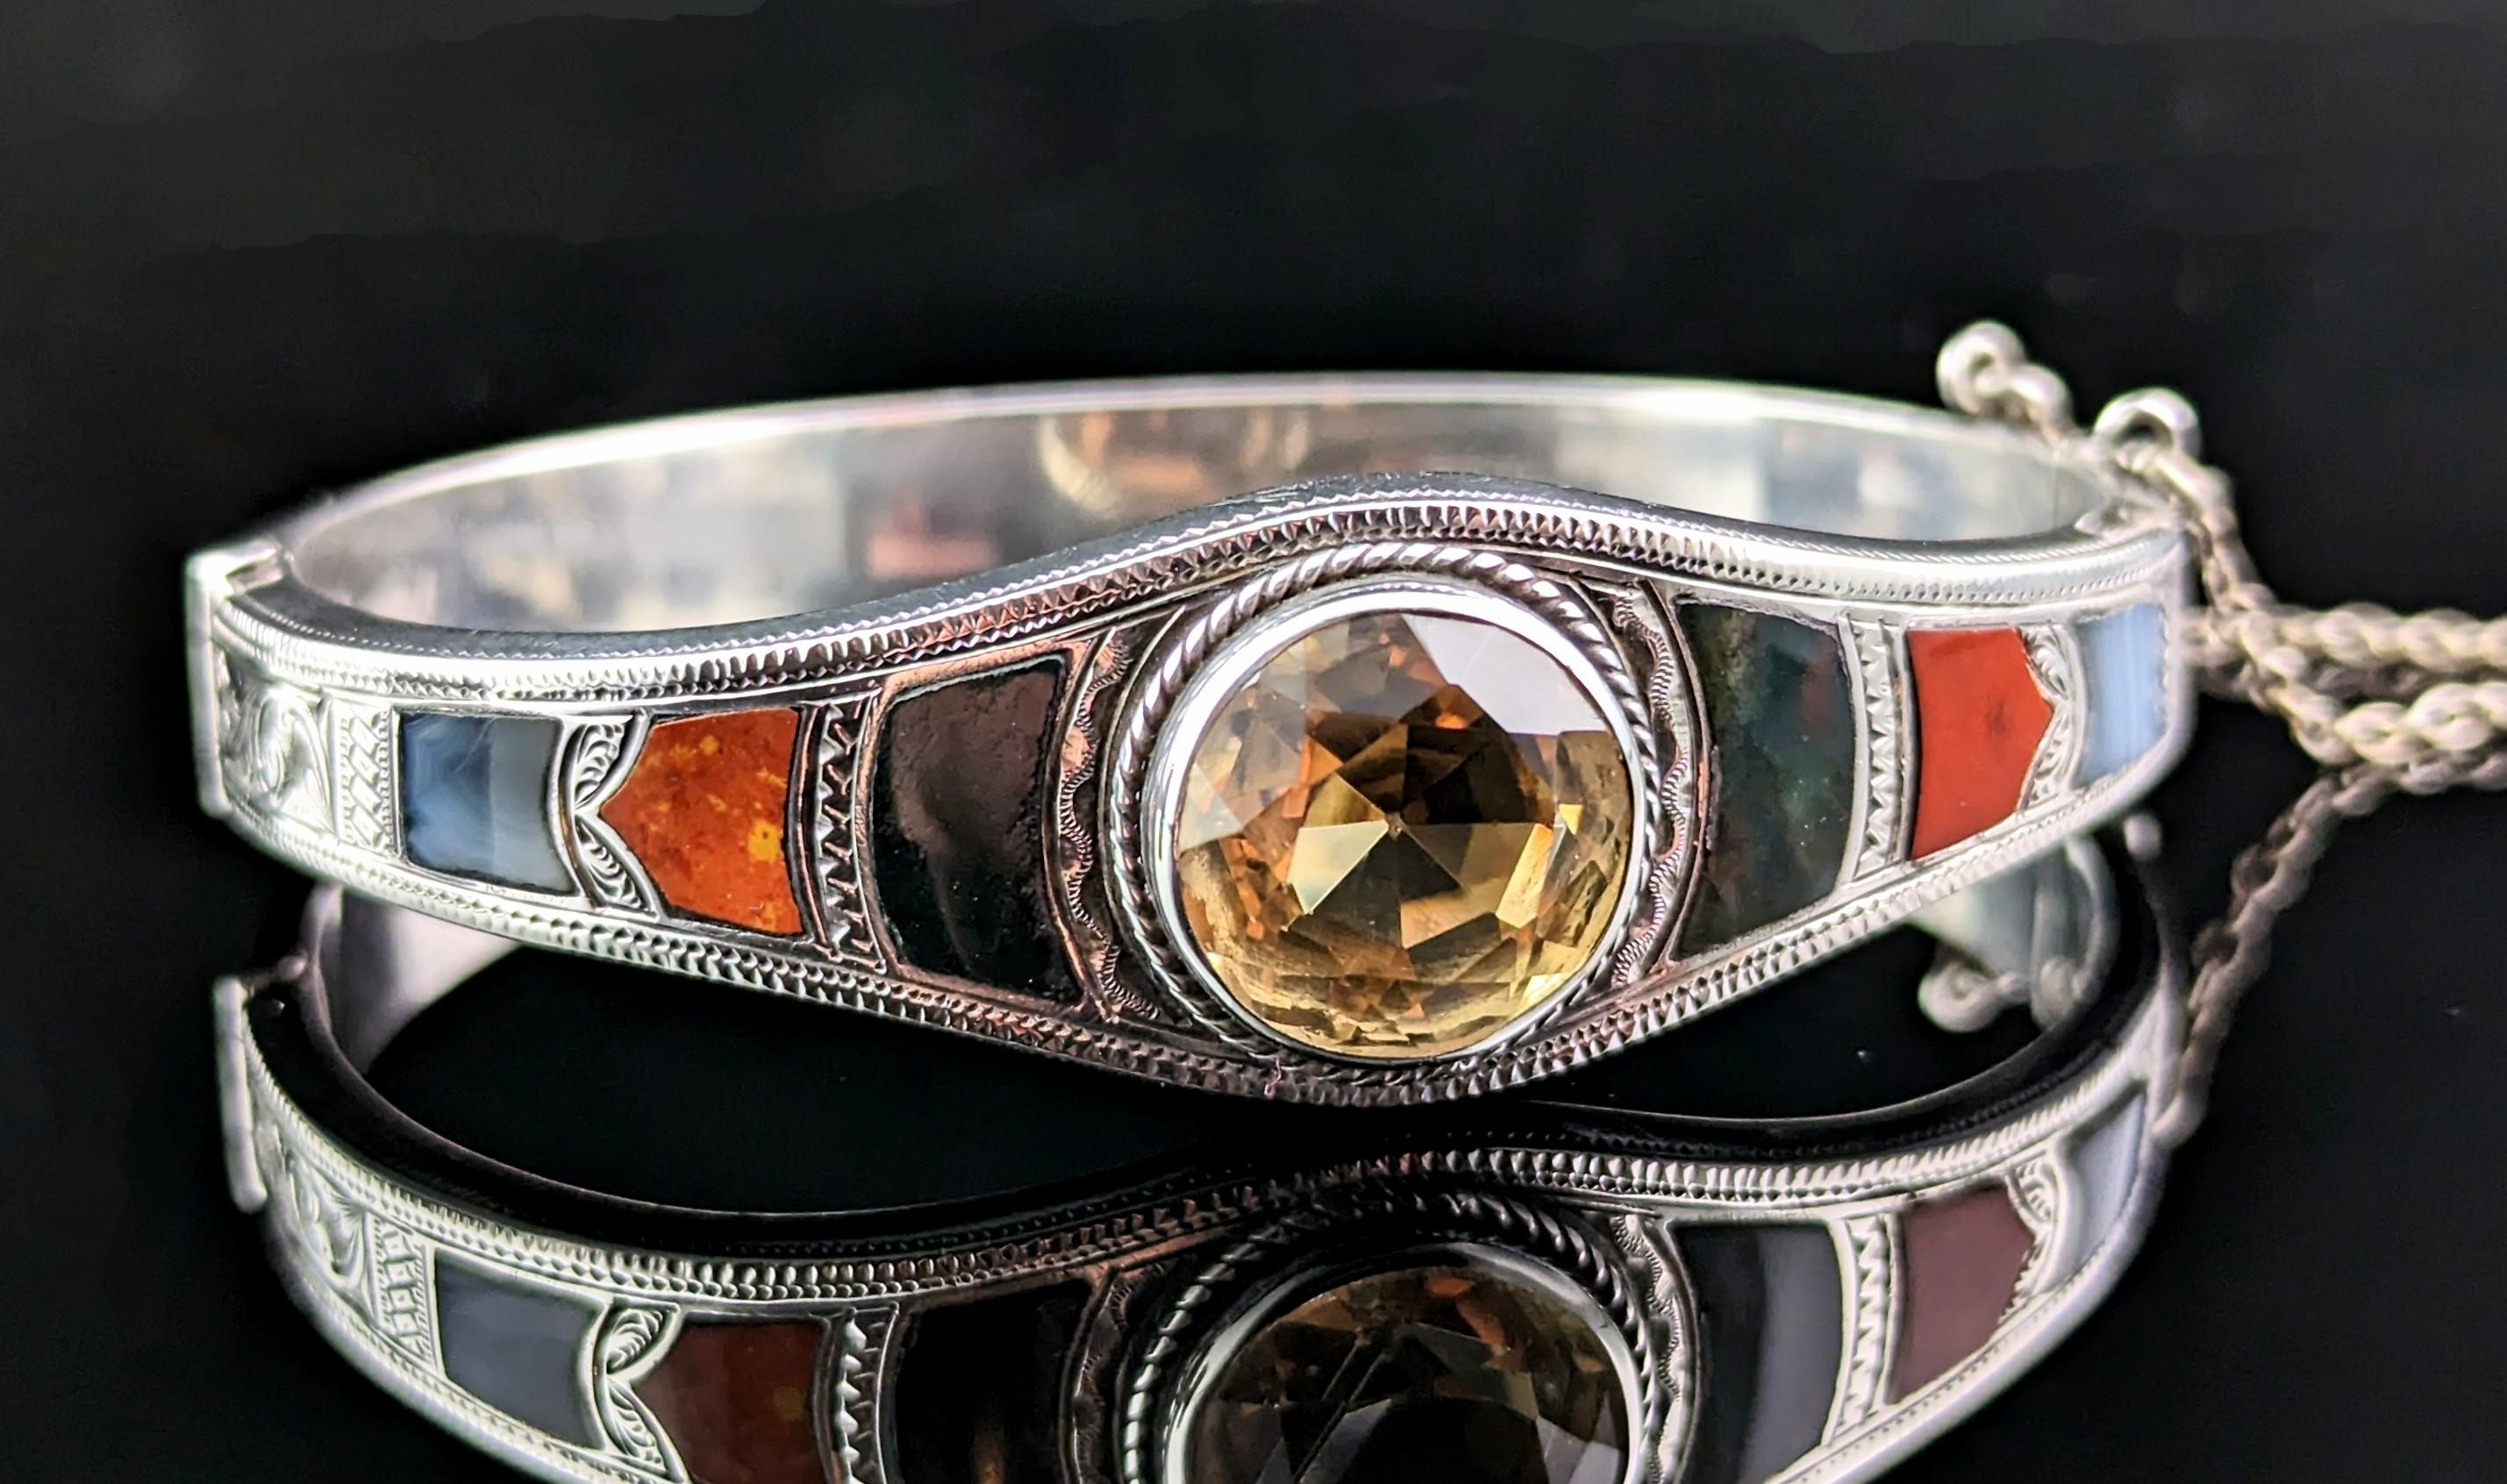 This rare antique Scottish Agate and citrine bangle is really something else!

The bangle is crafted in cool sterling silver, finely engraved to the front section and set with various beautiful Scottish Agate slabs including Bloodstone, Red Jasper